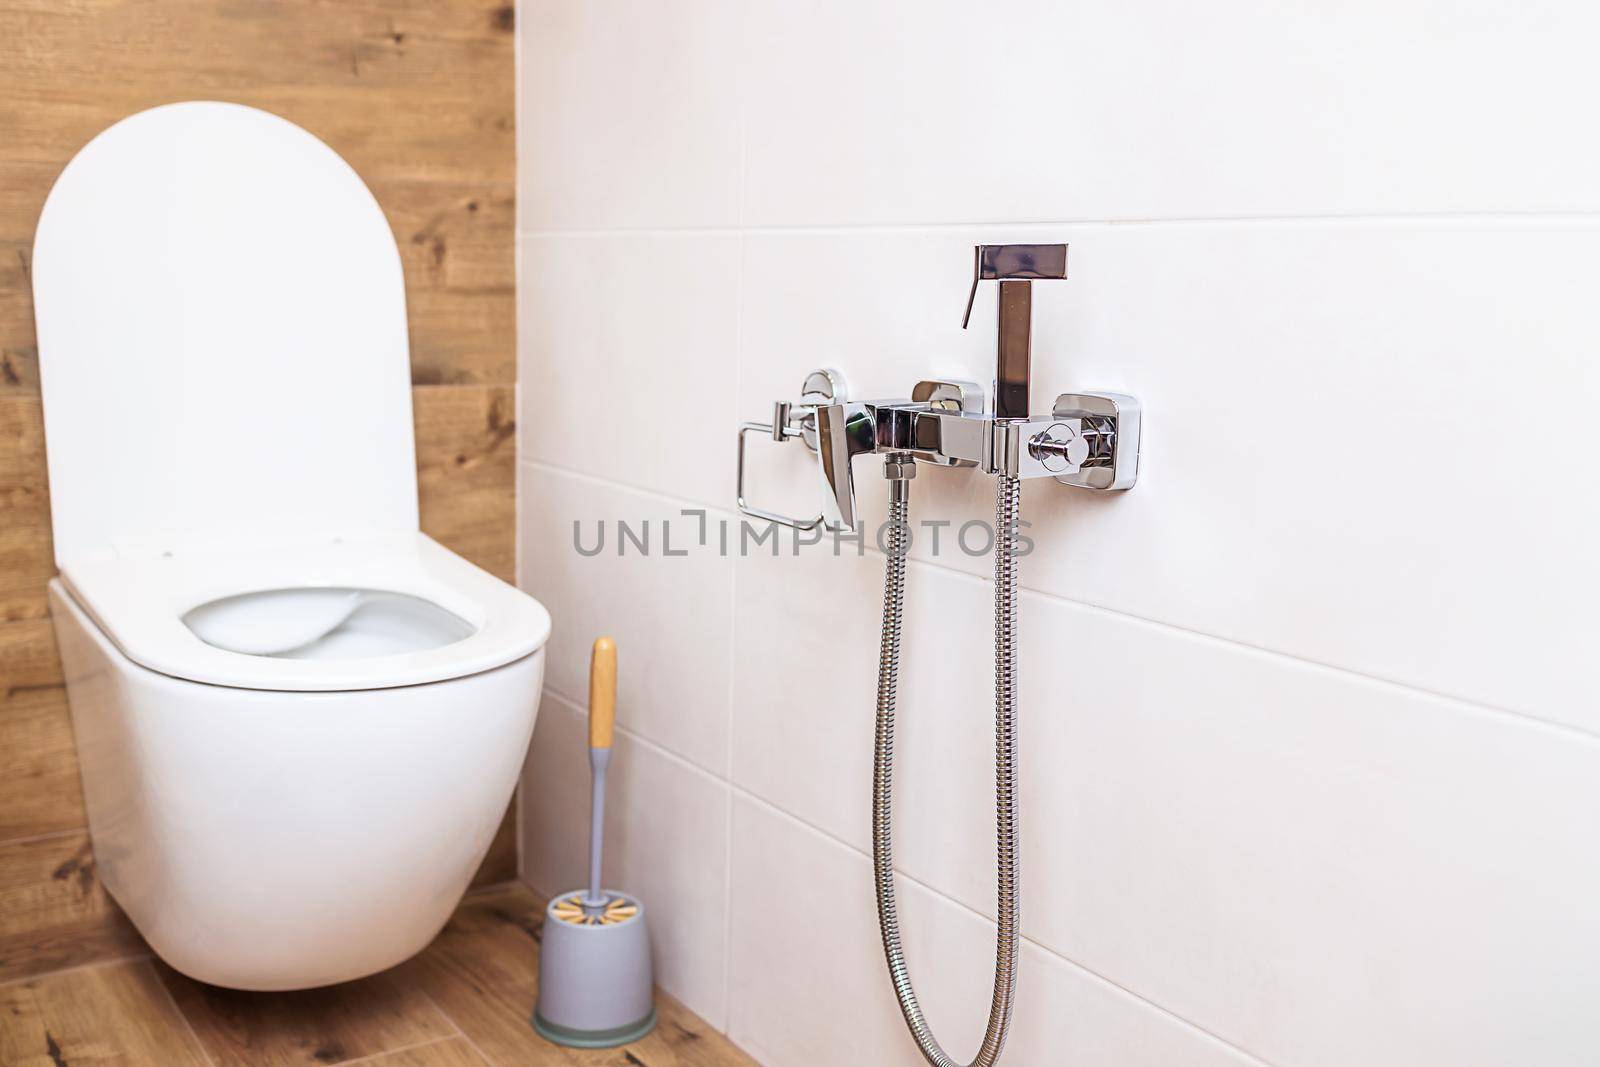 Fashionable bathroom in a minimalist style interior. Close-up of a white toilet bowl and a chrome-plated hygienic shower on the wall. The concept of hygiene, body care. Modern sanitary equipment